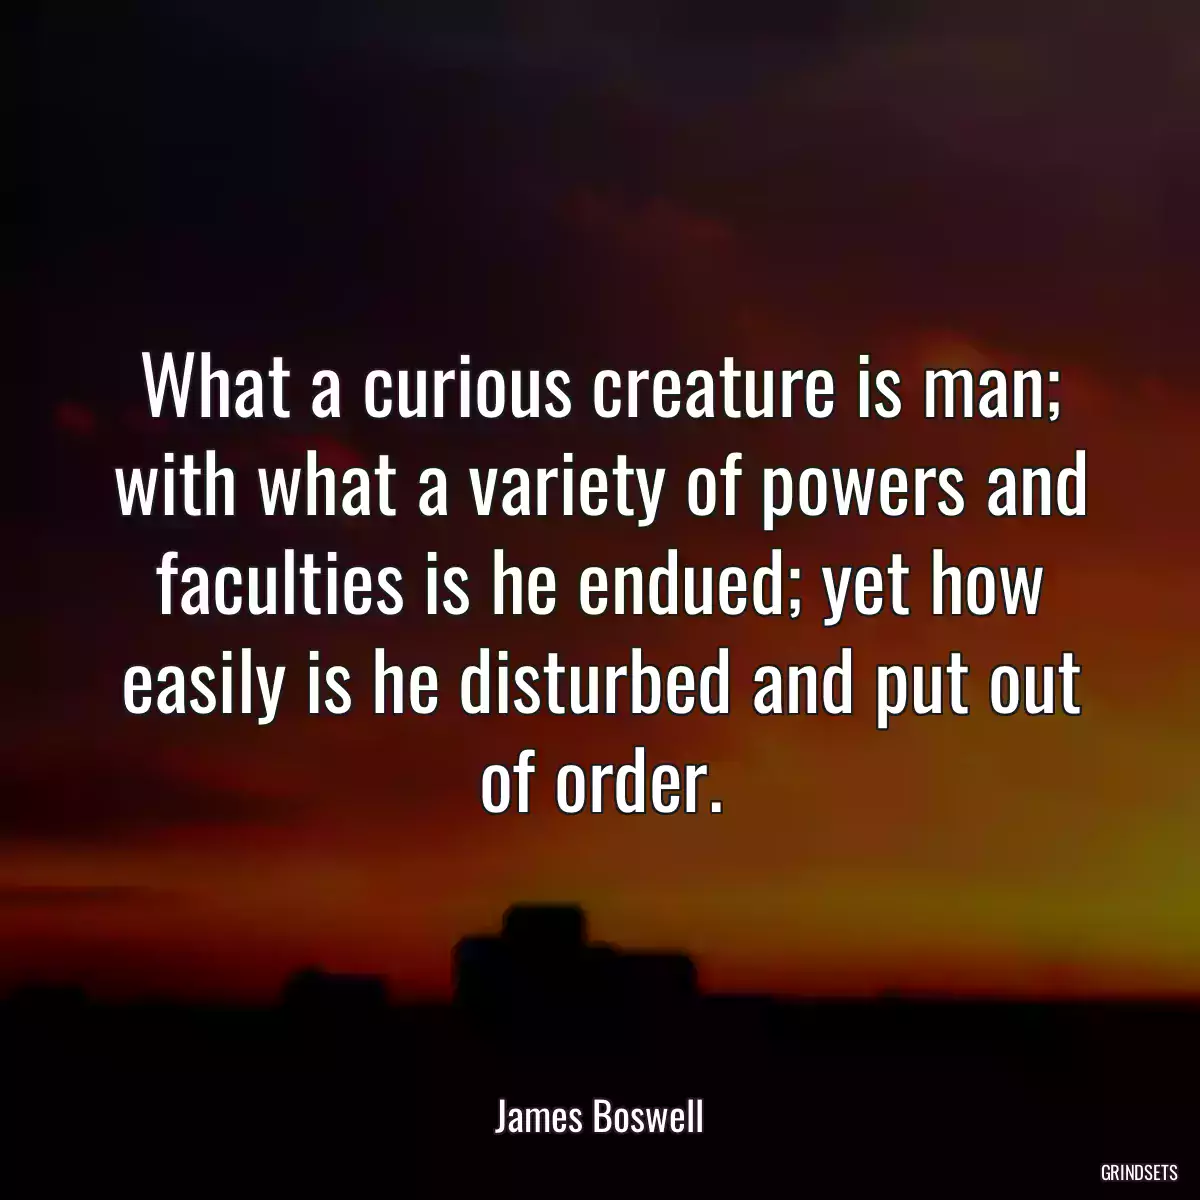 What a curious creature is man; with what a variety of powers and faculties is he endued; yet how easily is he disturbed and put out of order.